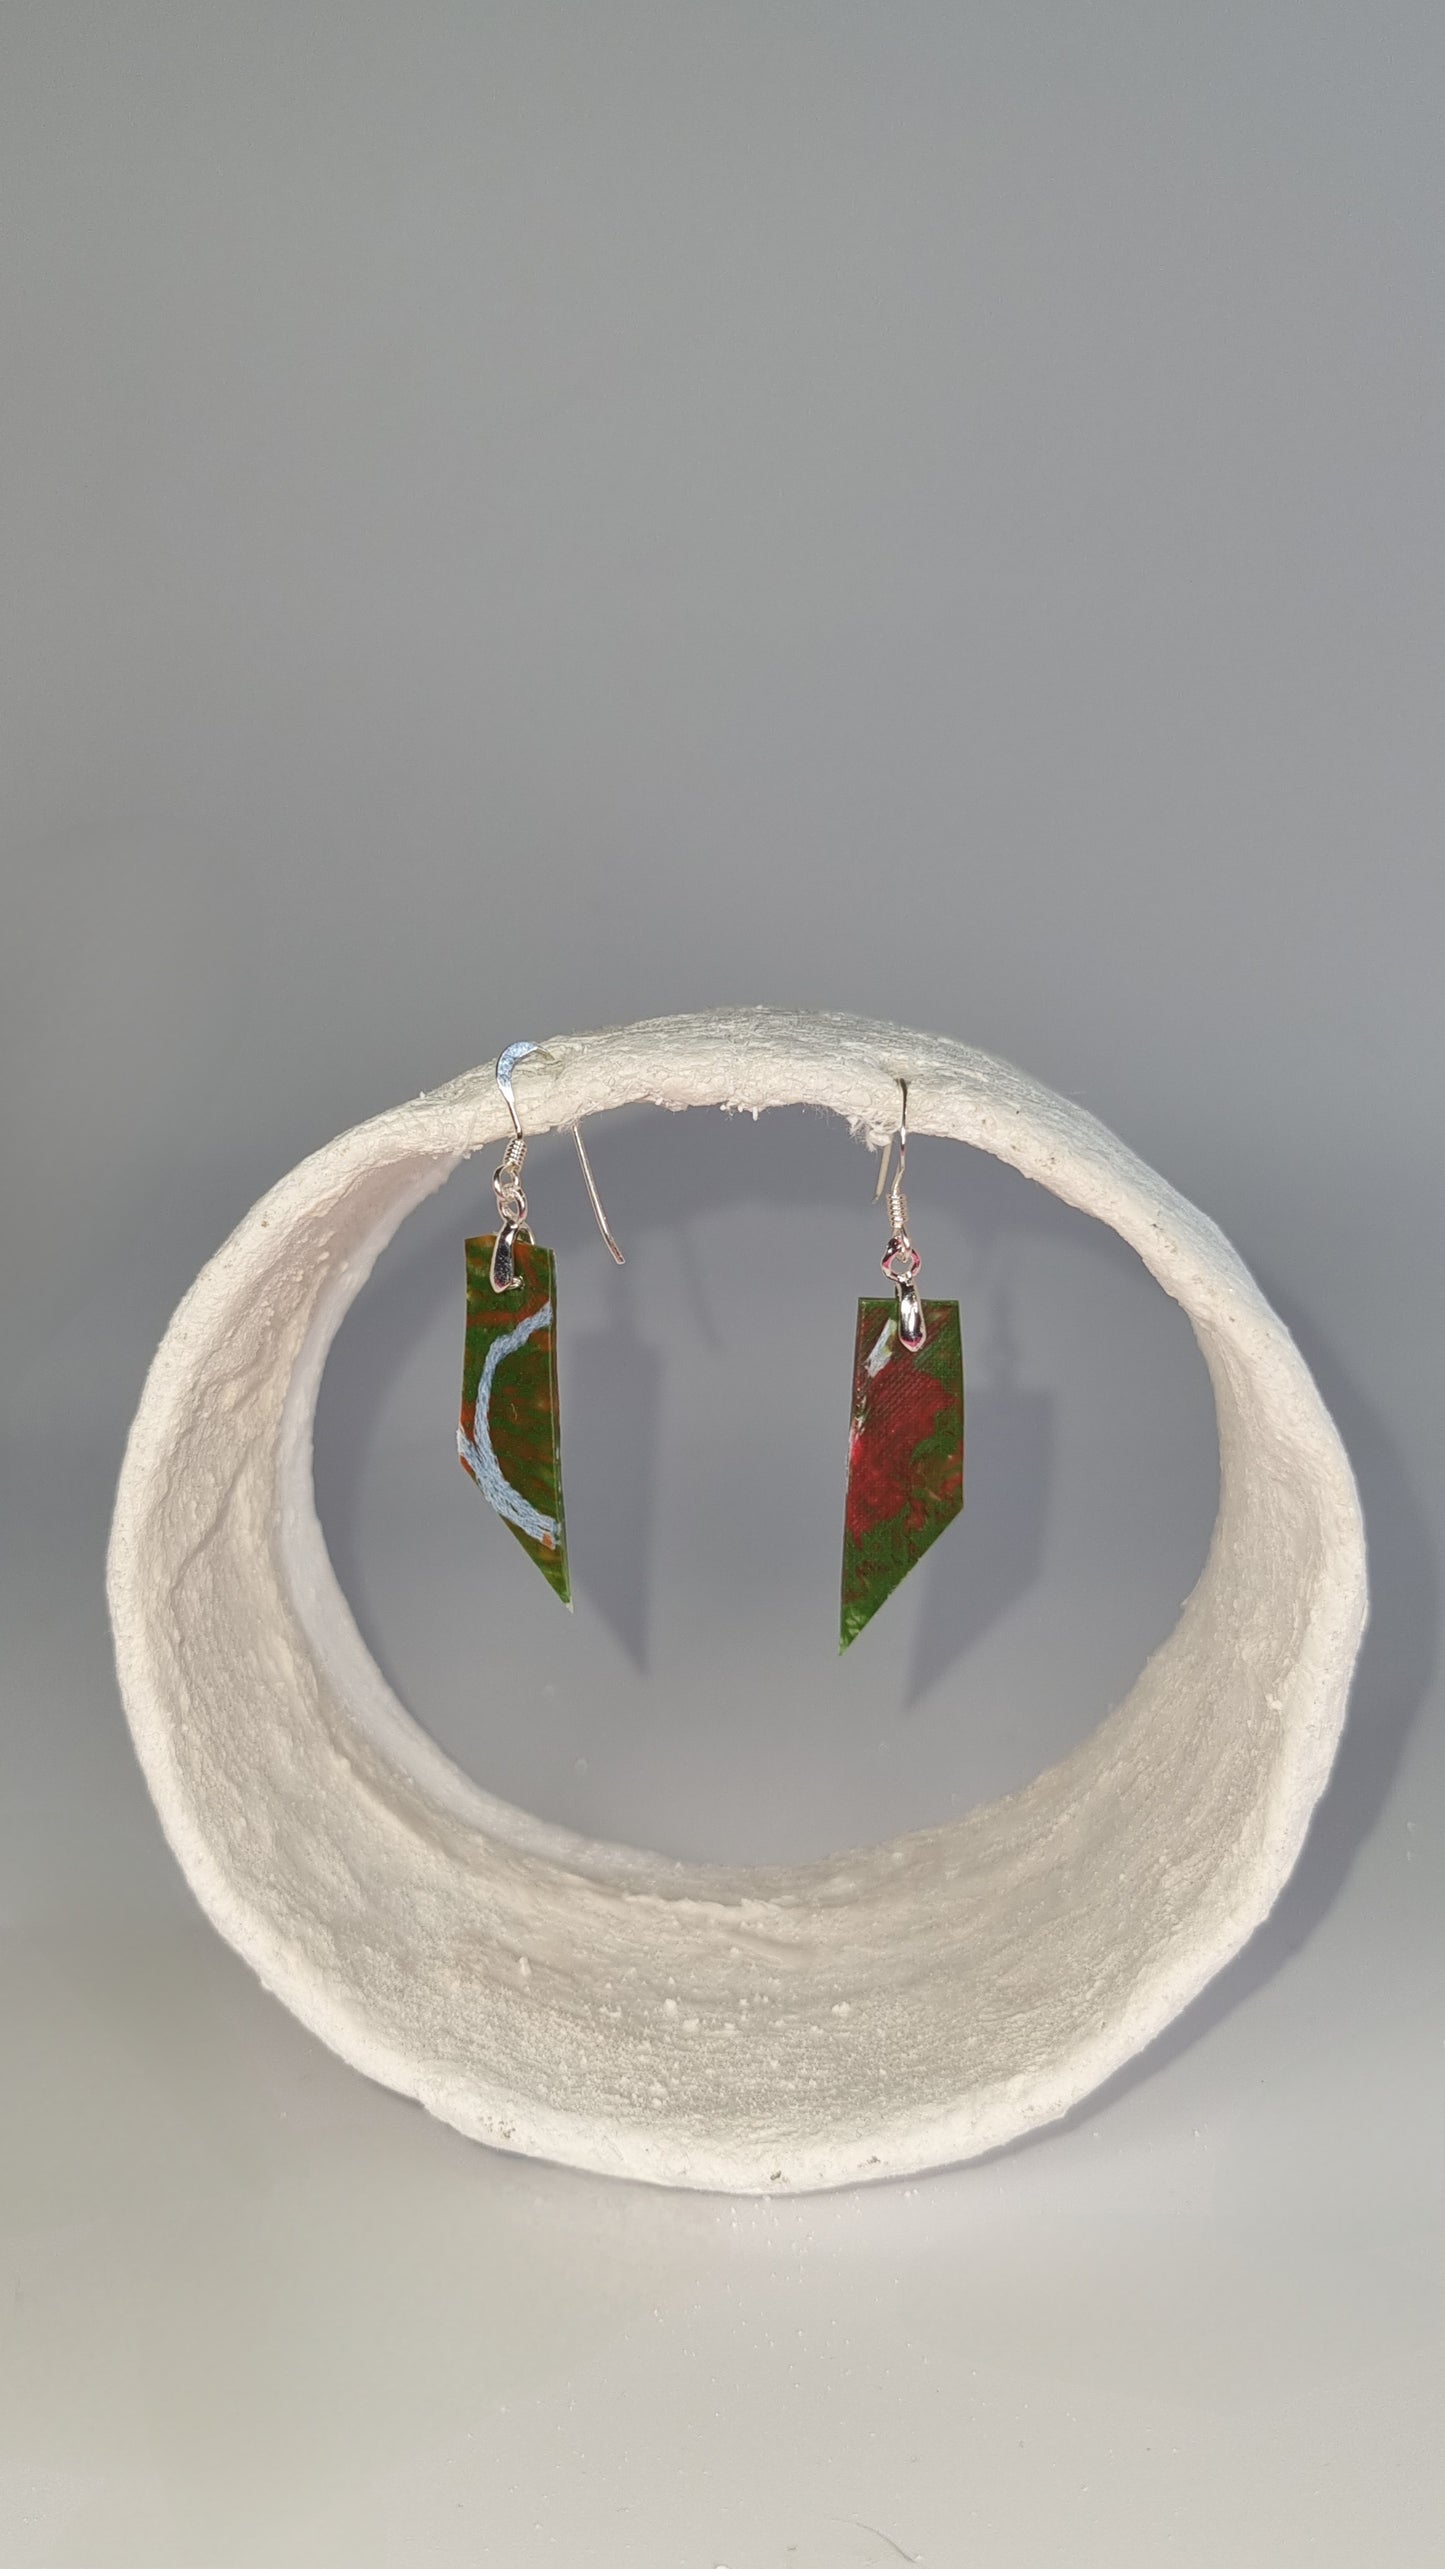 Tiny red and green earrings with pale blue thread incased - PLASTIQUE By Siân